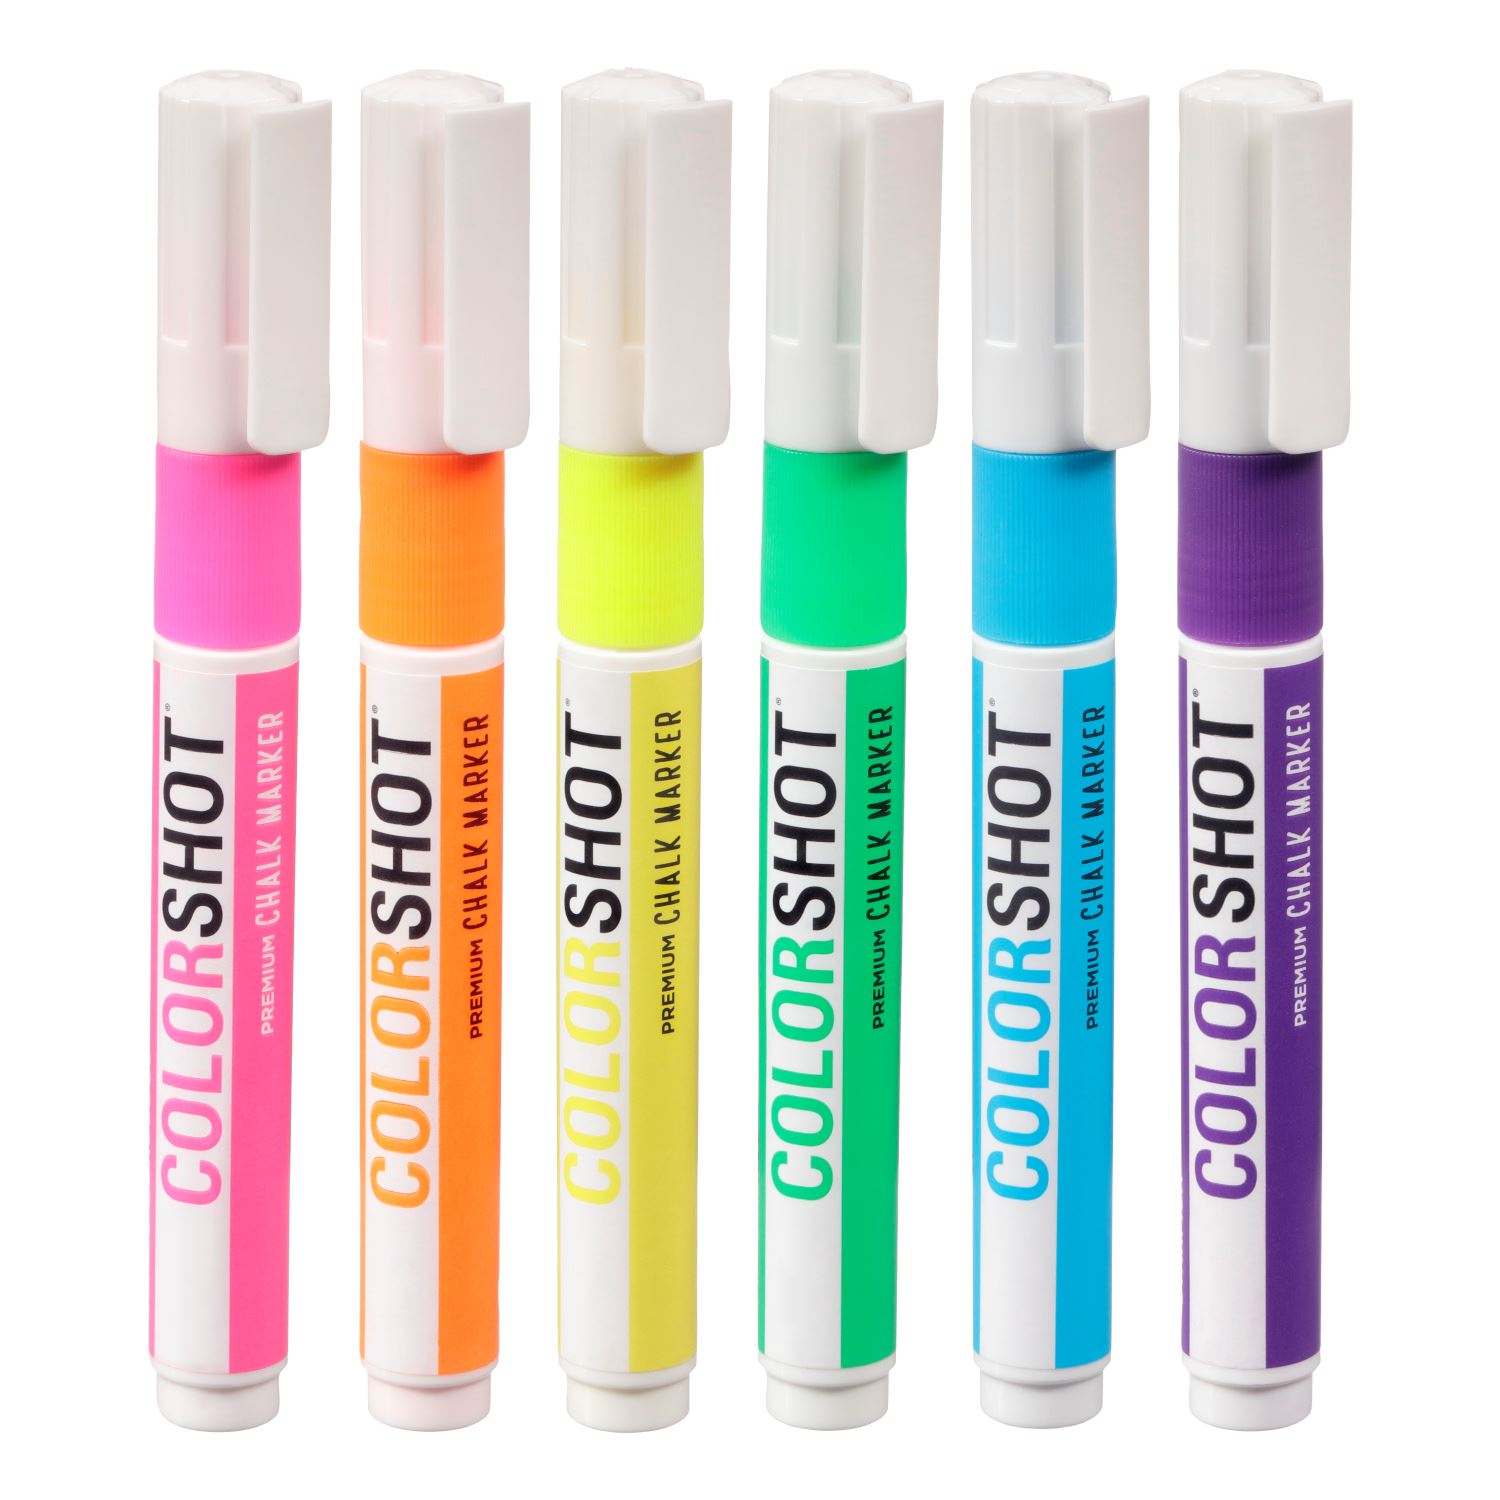 Premium Photo  Six bright colored markers isolated on a white